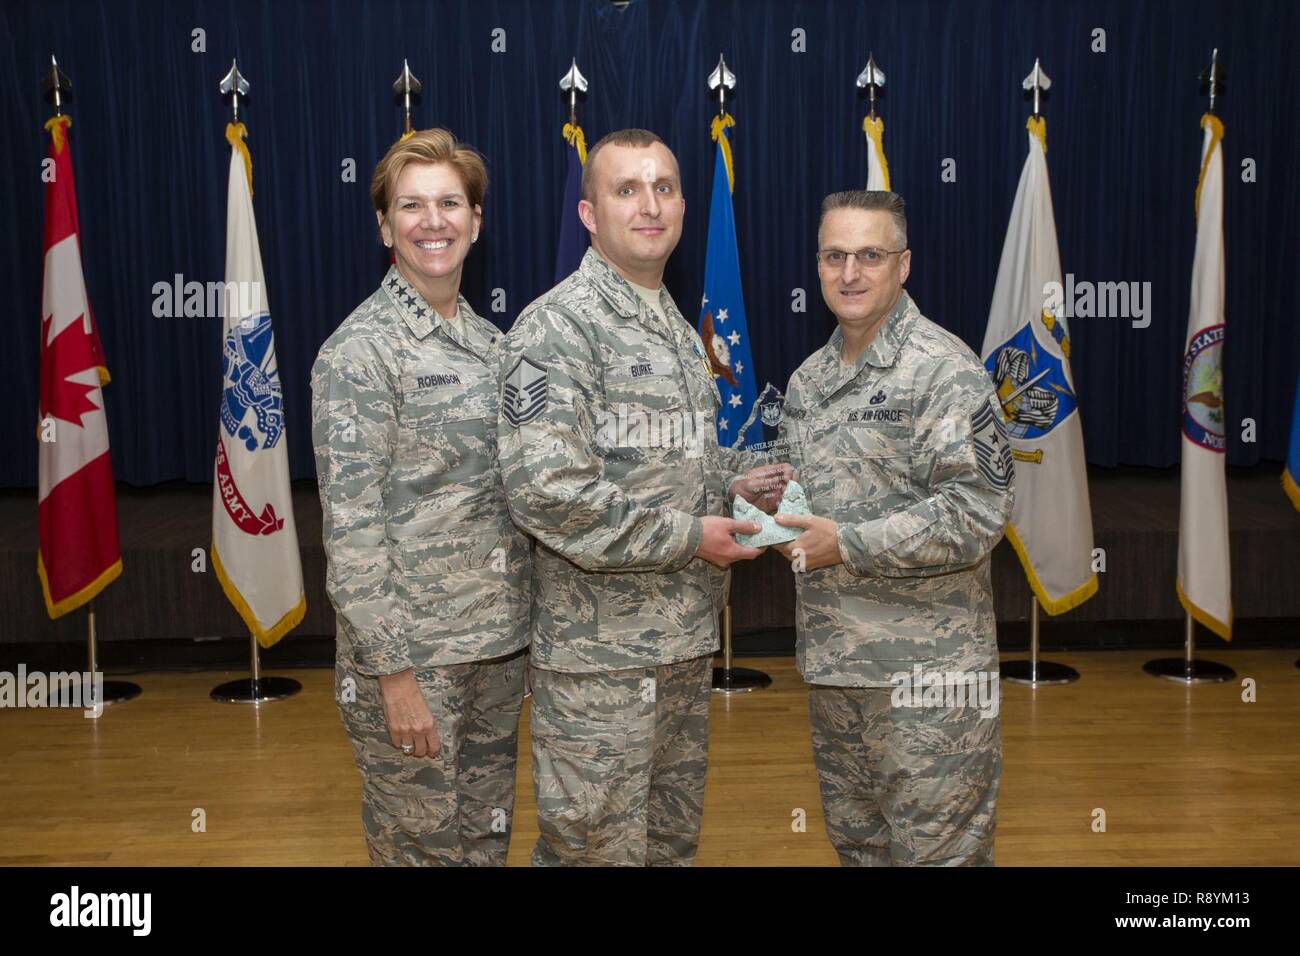 NORAD ( North American Aerosapce Defense Command) Commander Lori Robinson and Chief Master Sgt. Harold Hutchinson, right, NORAD's Senior Enlisted Leader present the NORAD Senior Noncomisioned Officer of the Year award to Master Sgt James Burke, a member of the 224th Air Defense Group of the New York Air National Guard, on March 14, 2017 during a ceremony at NORAD headquarters on Colorado Springs, CO. The 224th Air Defense Group is manned by New York Air National Guard Airmen and is a component of the Easter Air Defense Sector which coordinates air defense for the United States east of the Miss Stock Photo